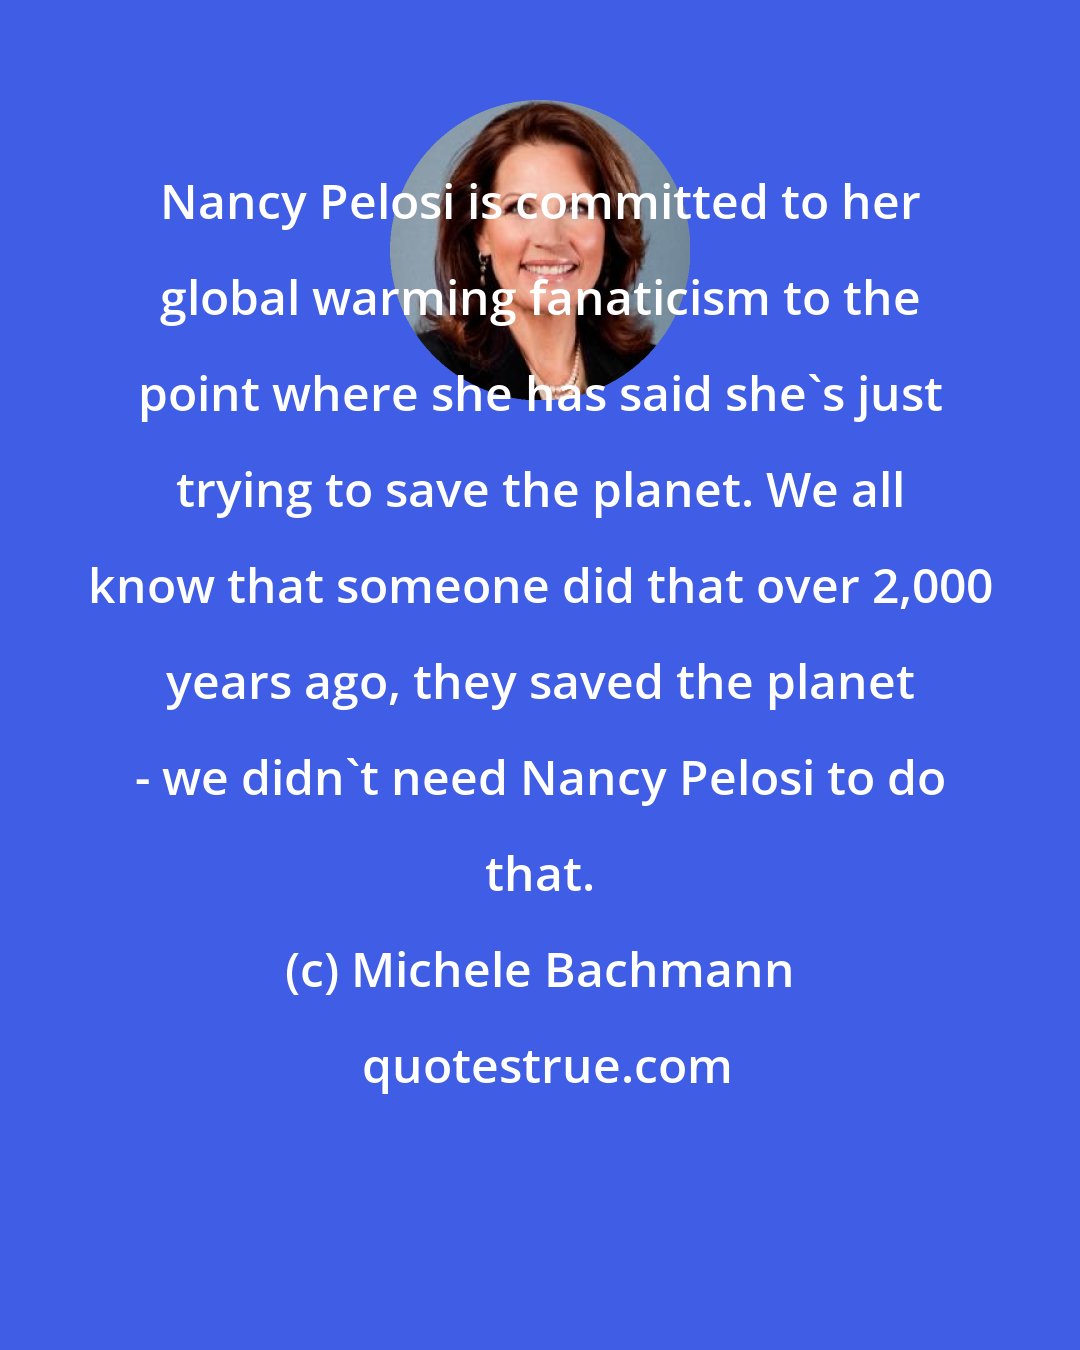 Michele Bachmann: Nancy Pelosi is committed to her global warming fanaticism to the point where she has said she's just trying to save the planet. We all know that someone did that over 2,000 years ago, they saved the planet - we didn't need Nancy Pelosi to do that.